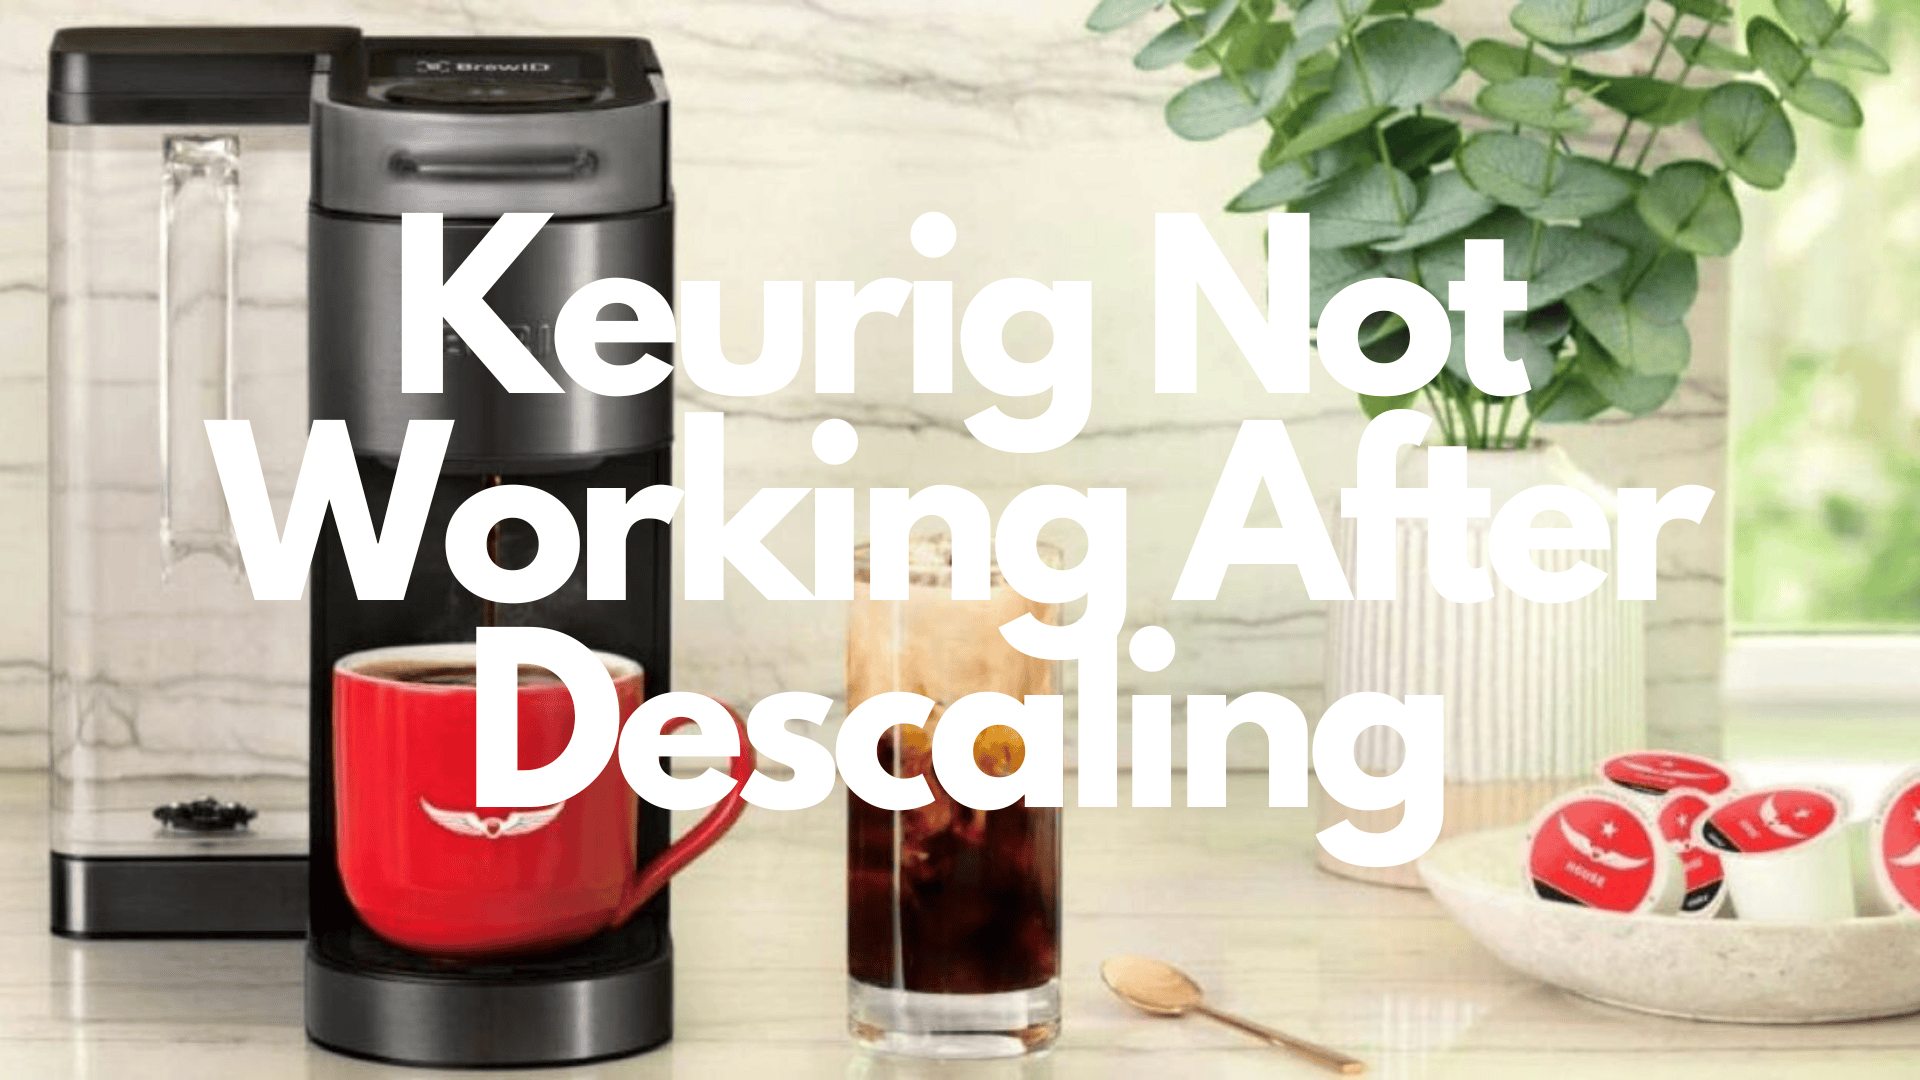 How to Troubleshoot a Keurig Coffee Maker: Common Problems